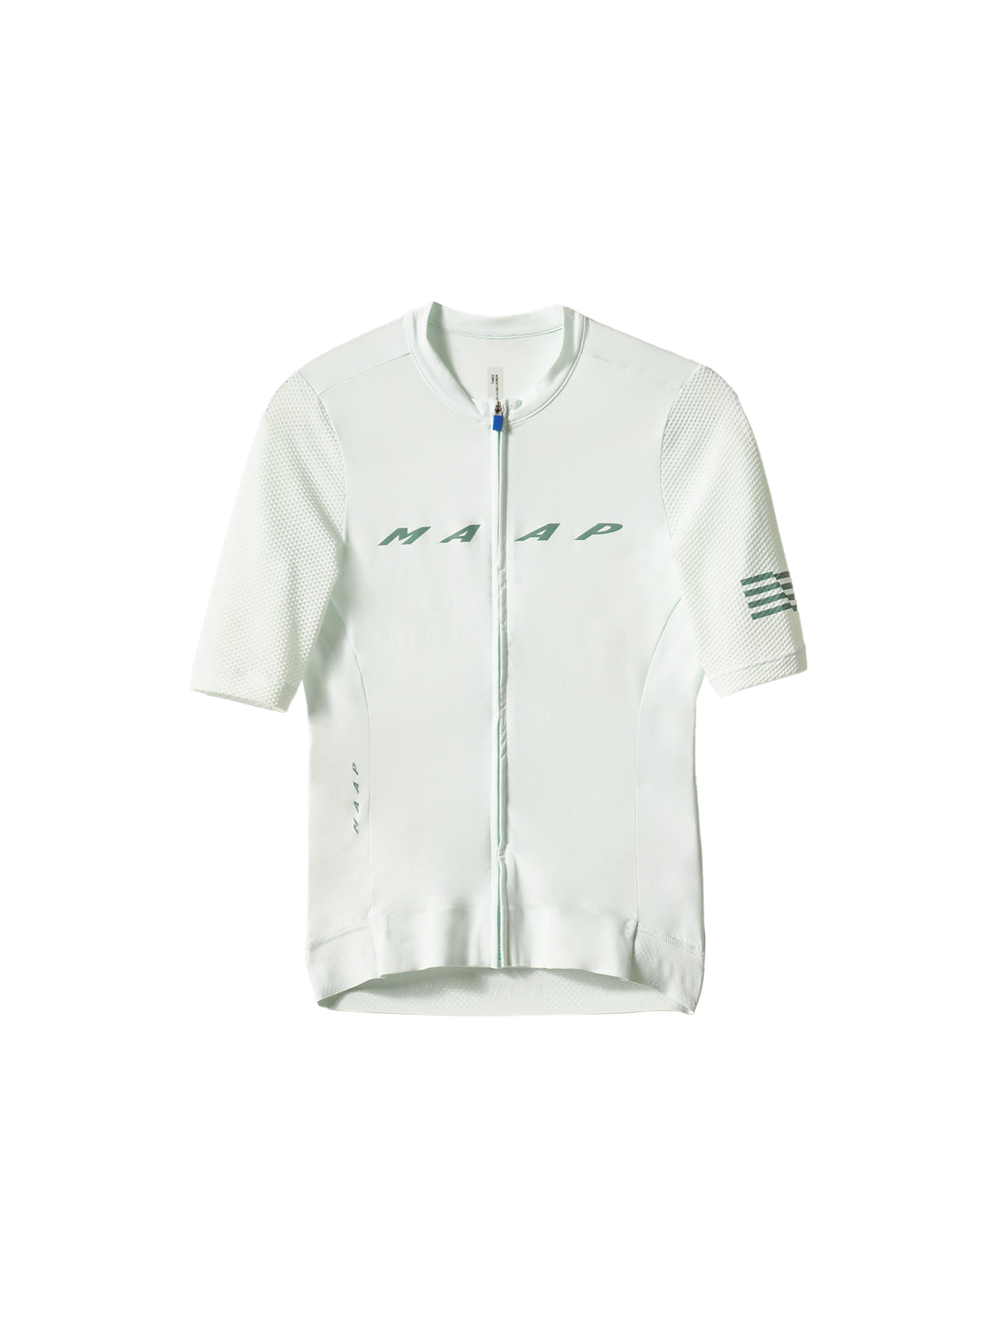 Product Image for Women's Evade Pro Base Jersey 2.0